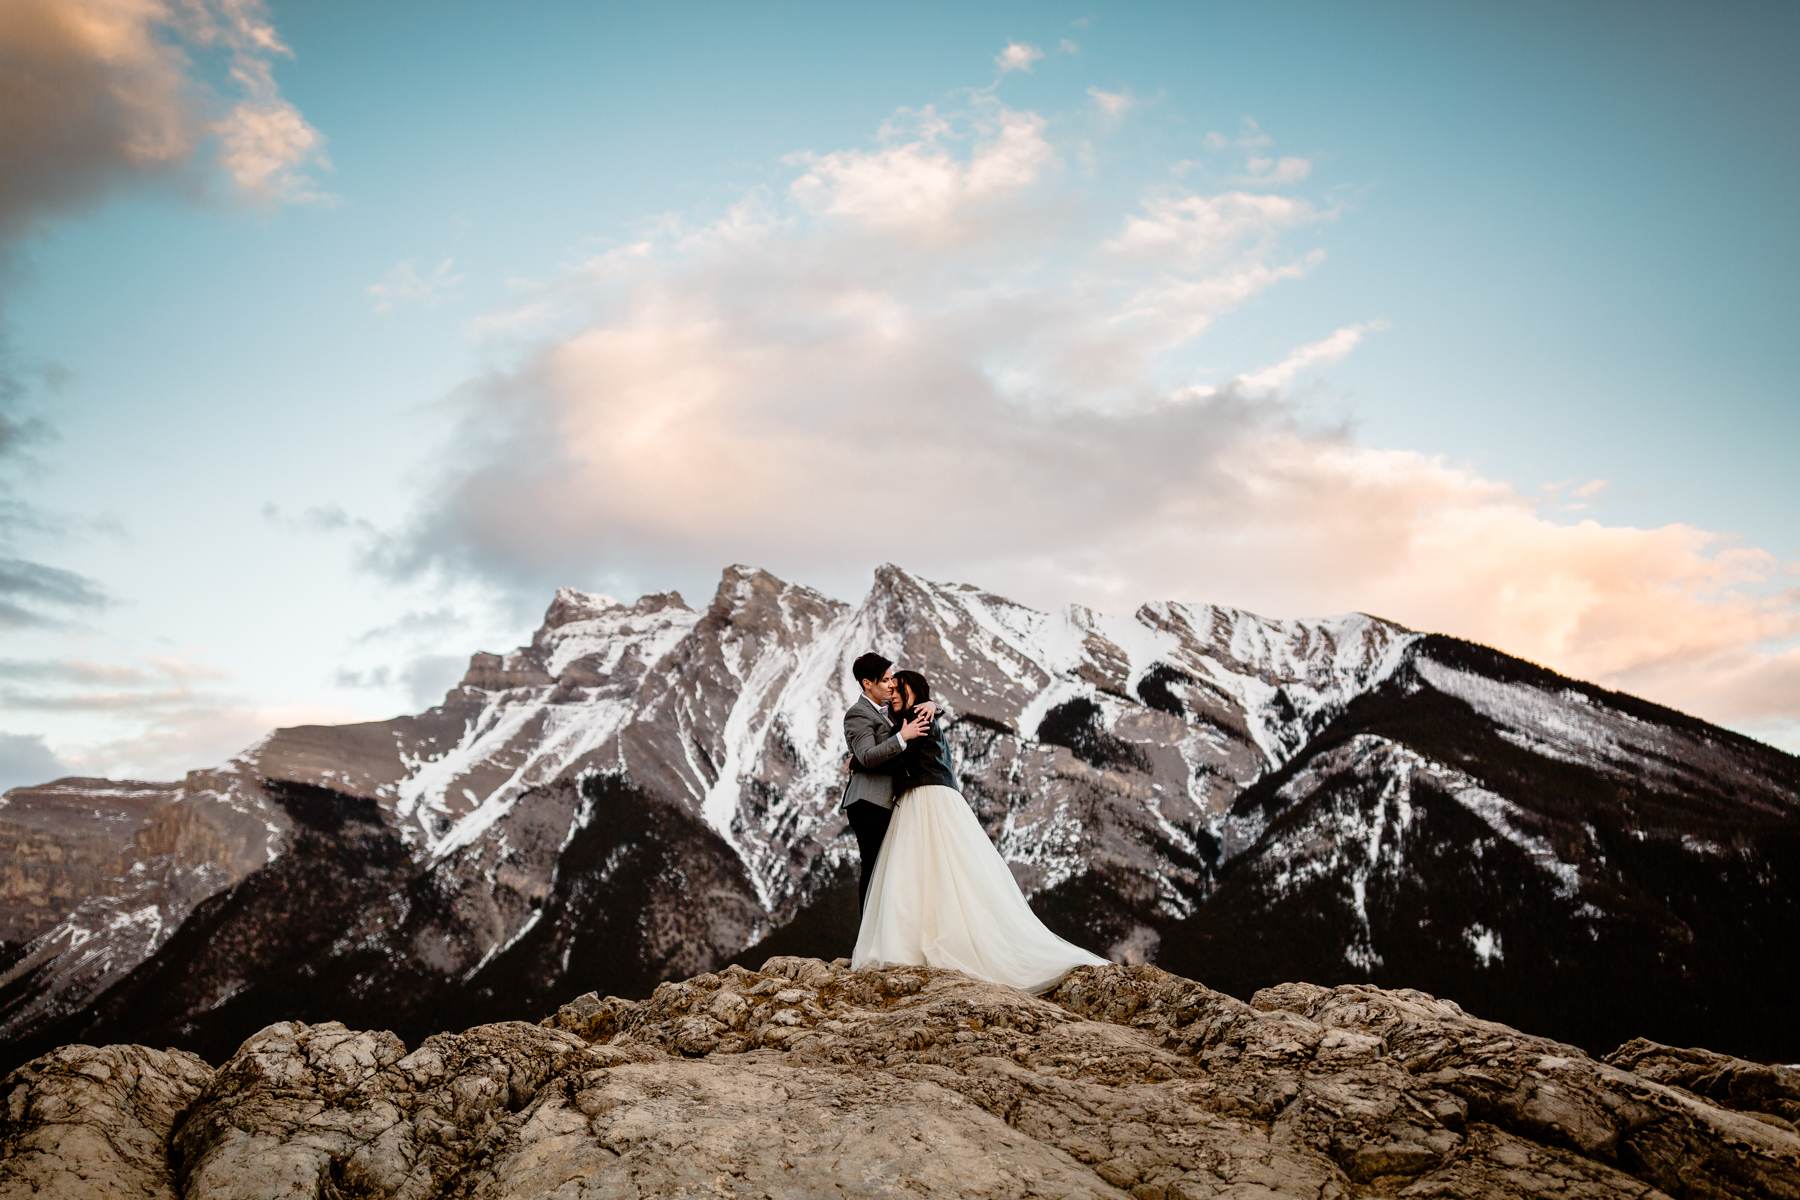 Banff National Park Elopement Photography with LGBTQ-friendly photographers - Image 29